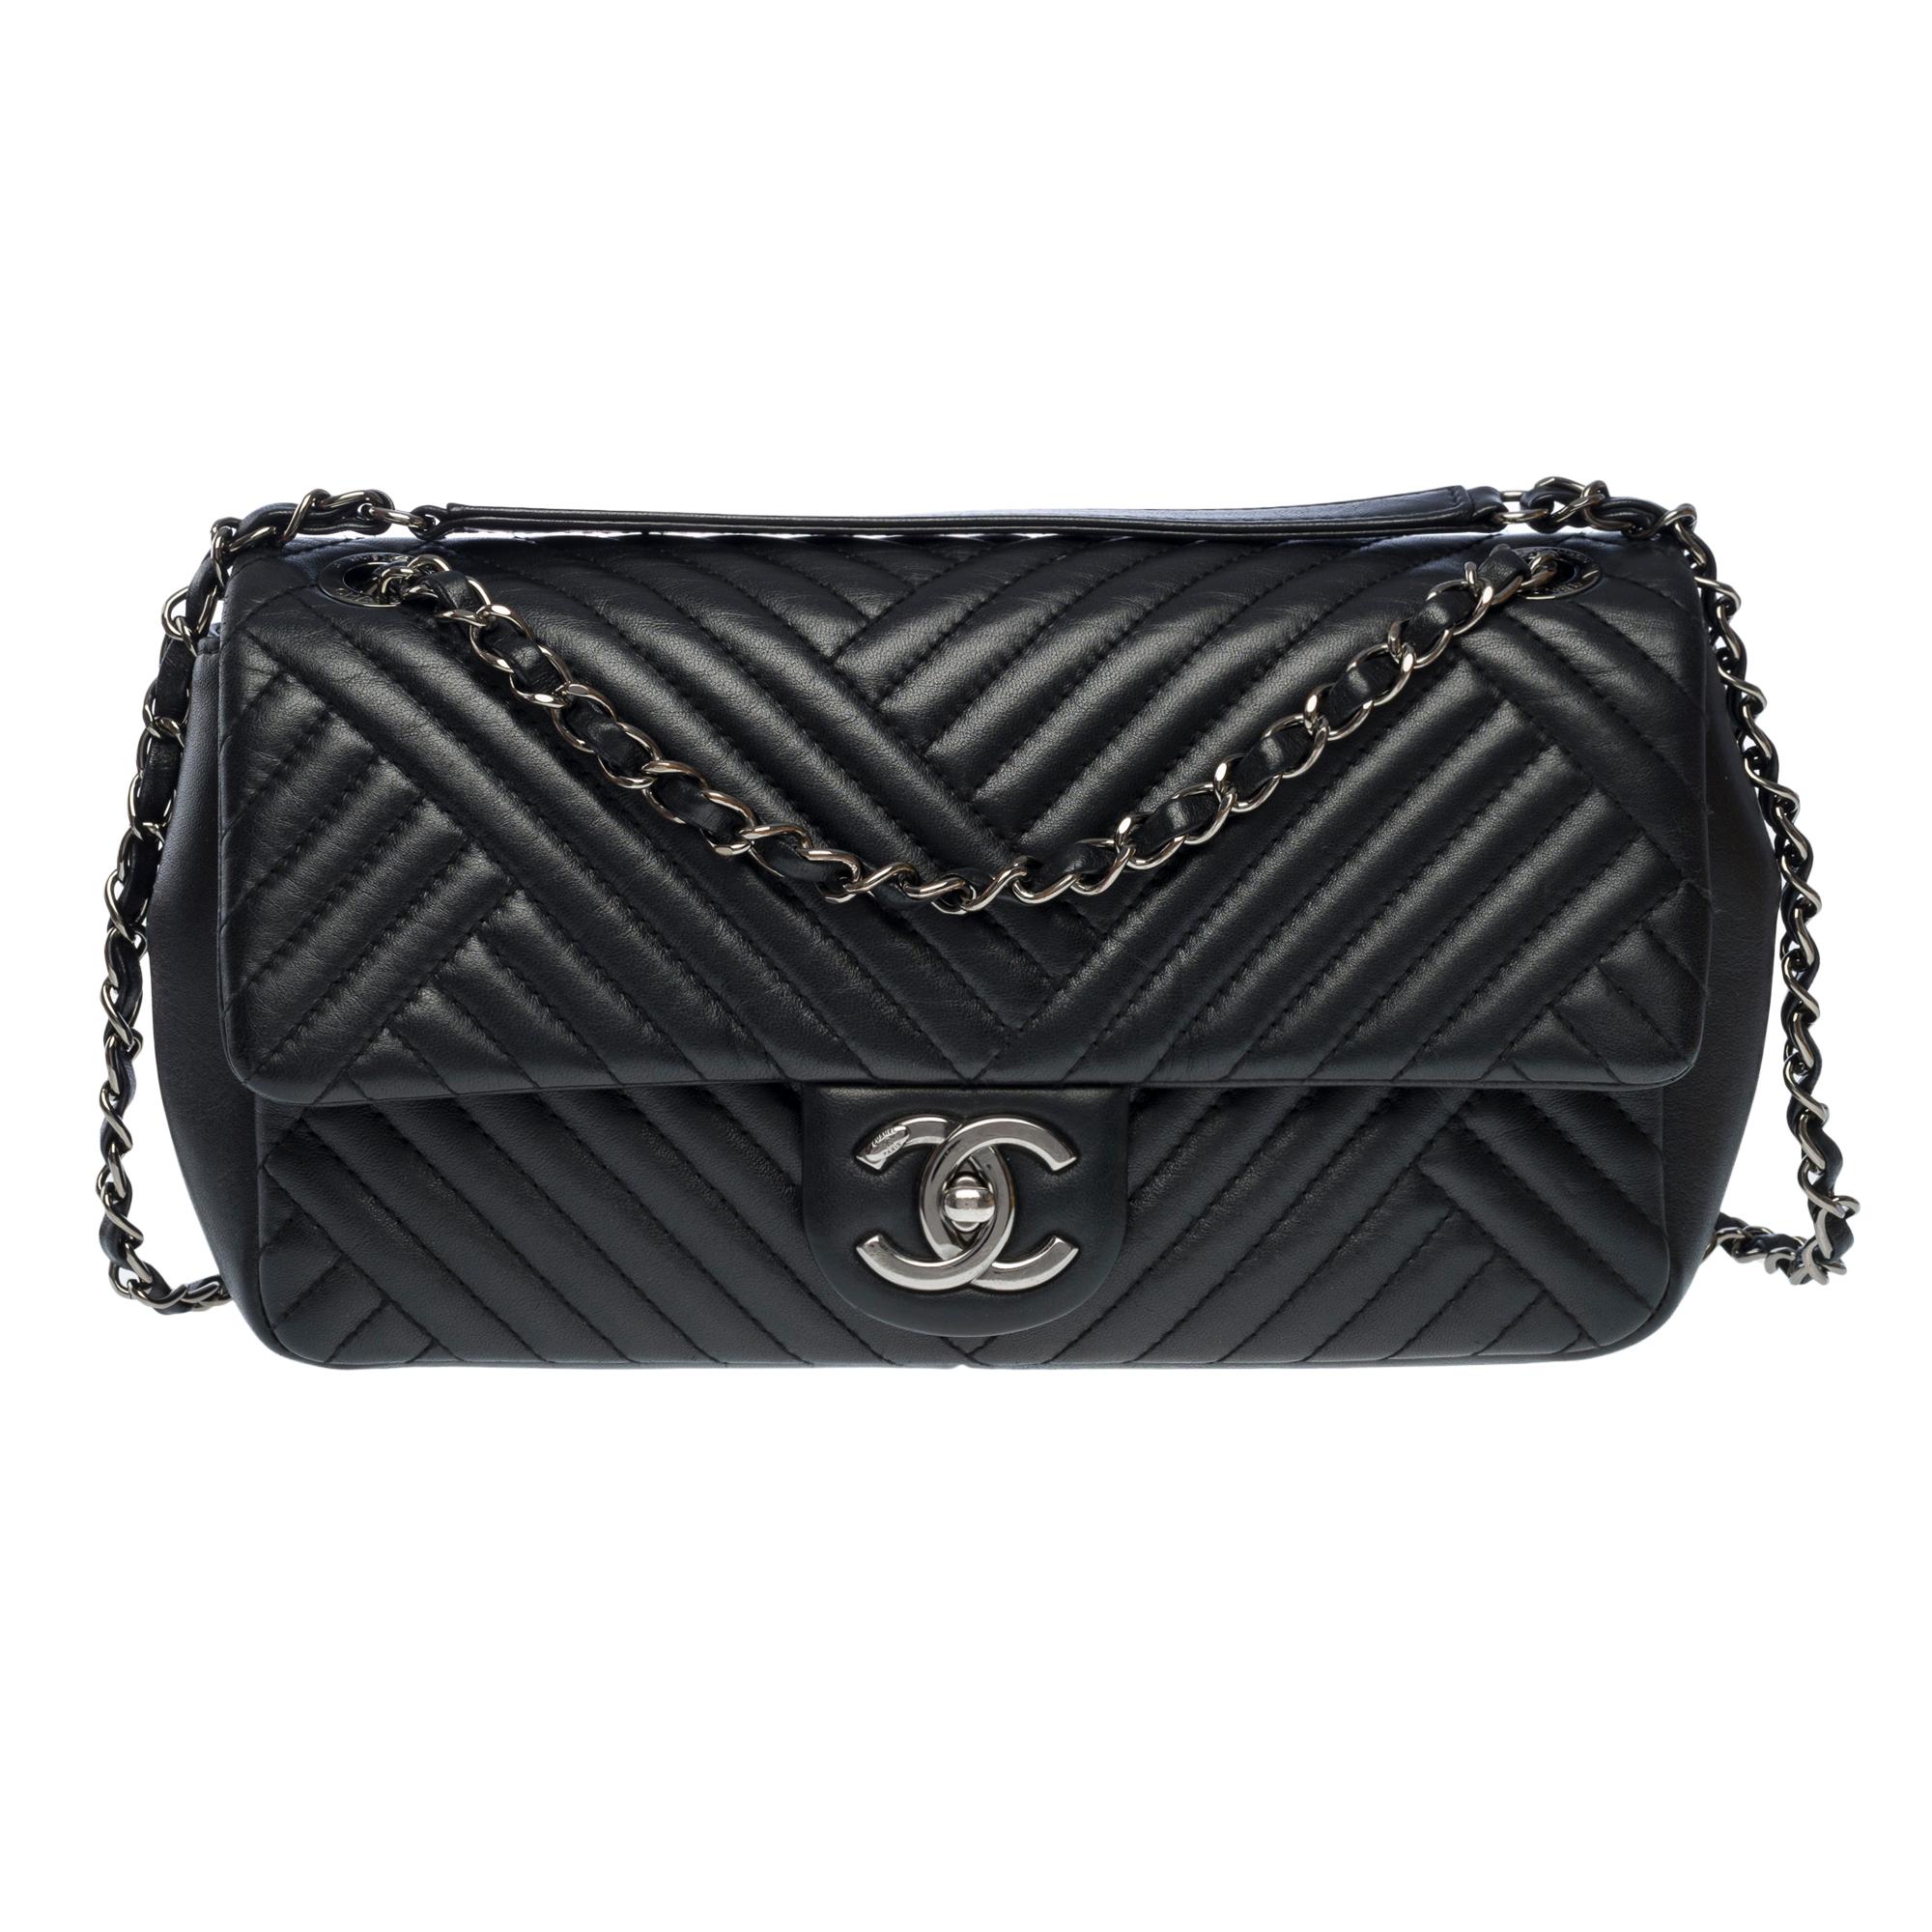 Exceptional and very Rare limited edition Chanel Timeless/Classic shoulder flap bag Medium in black asymmetrical lambskin leather with herringbone, ruthenium metal hardware, a ruthenium metal chain handle intertwined with black leather for carrying